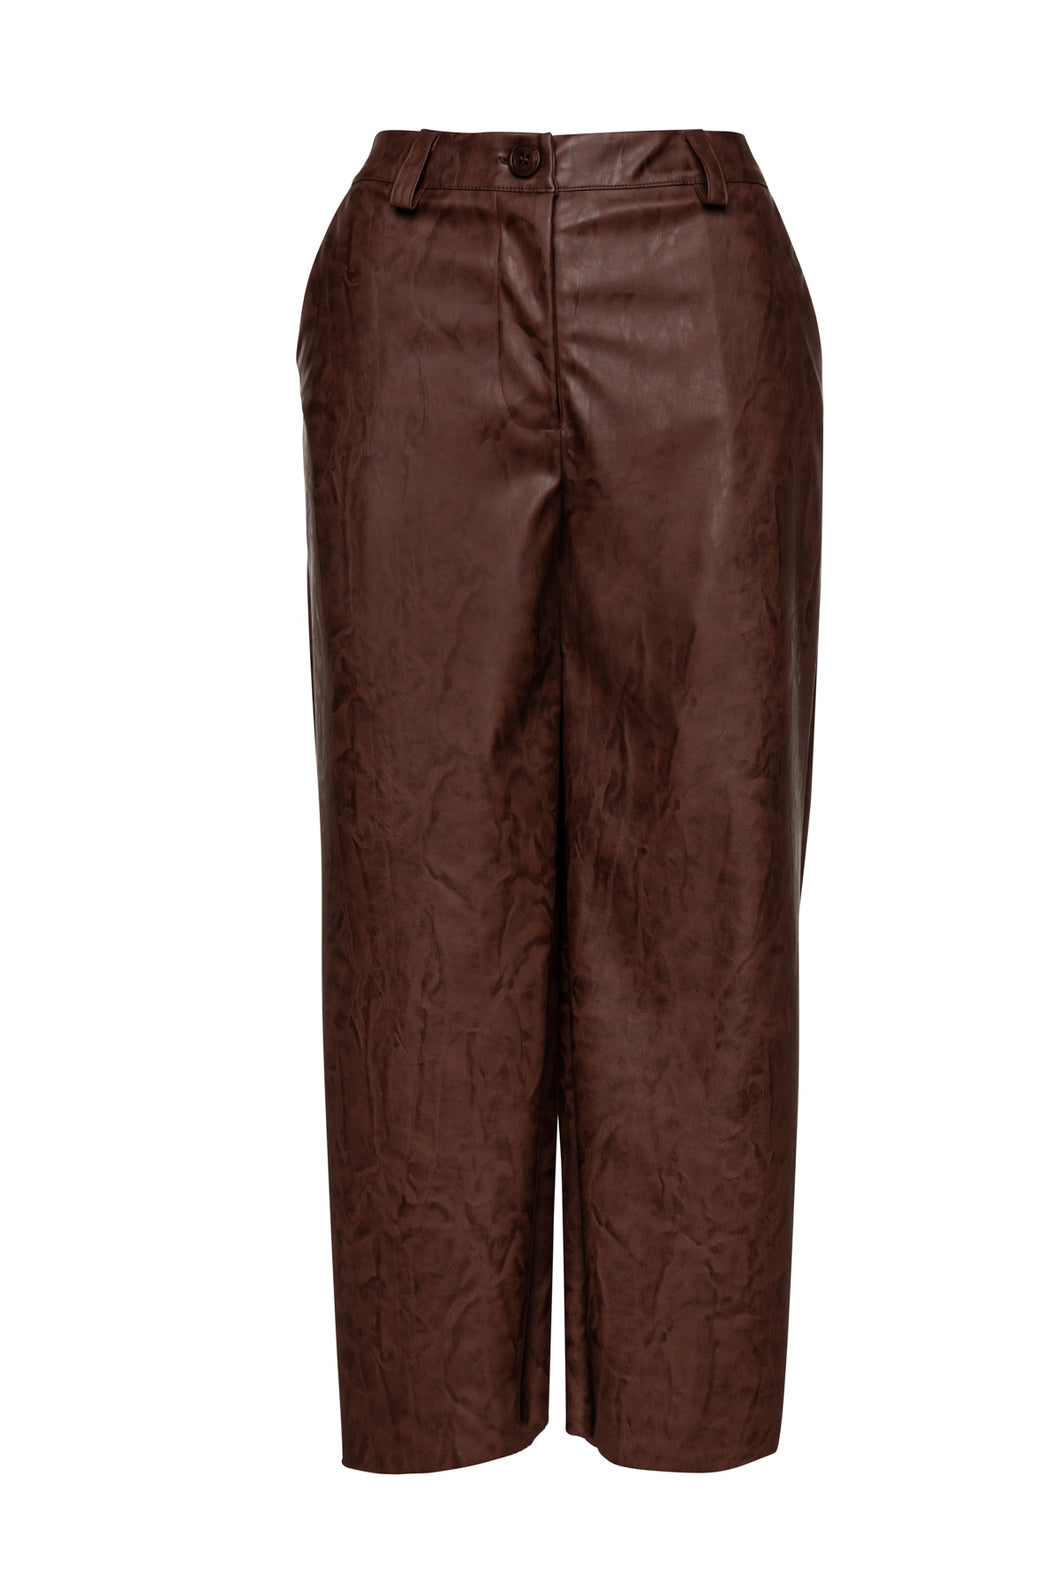 Chocolate Brown Faux Leather Culottes